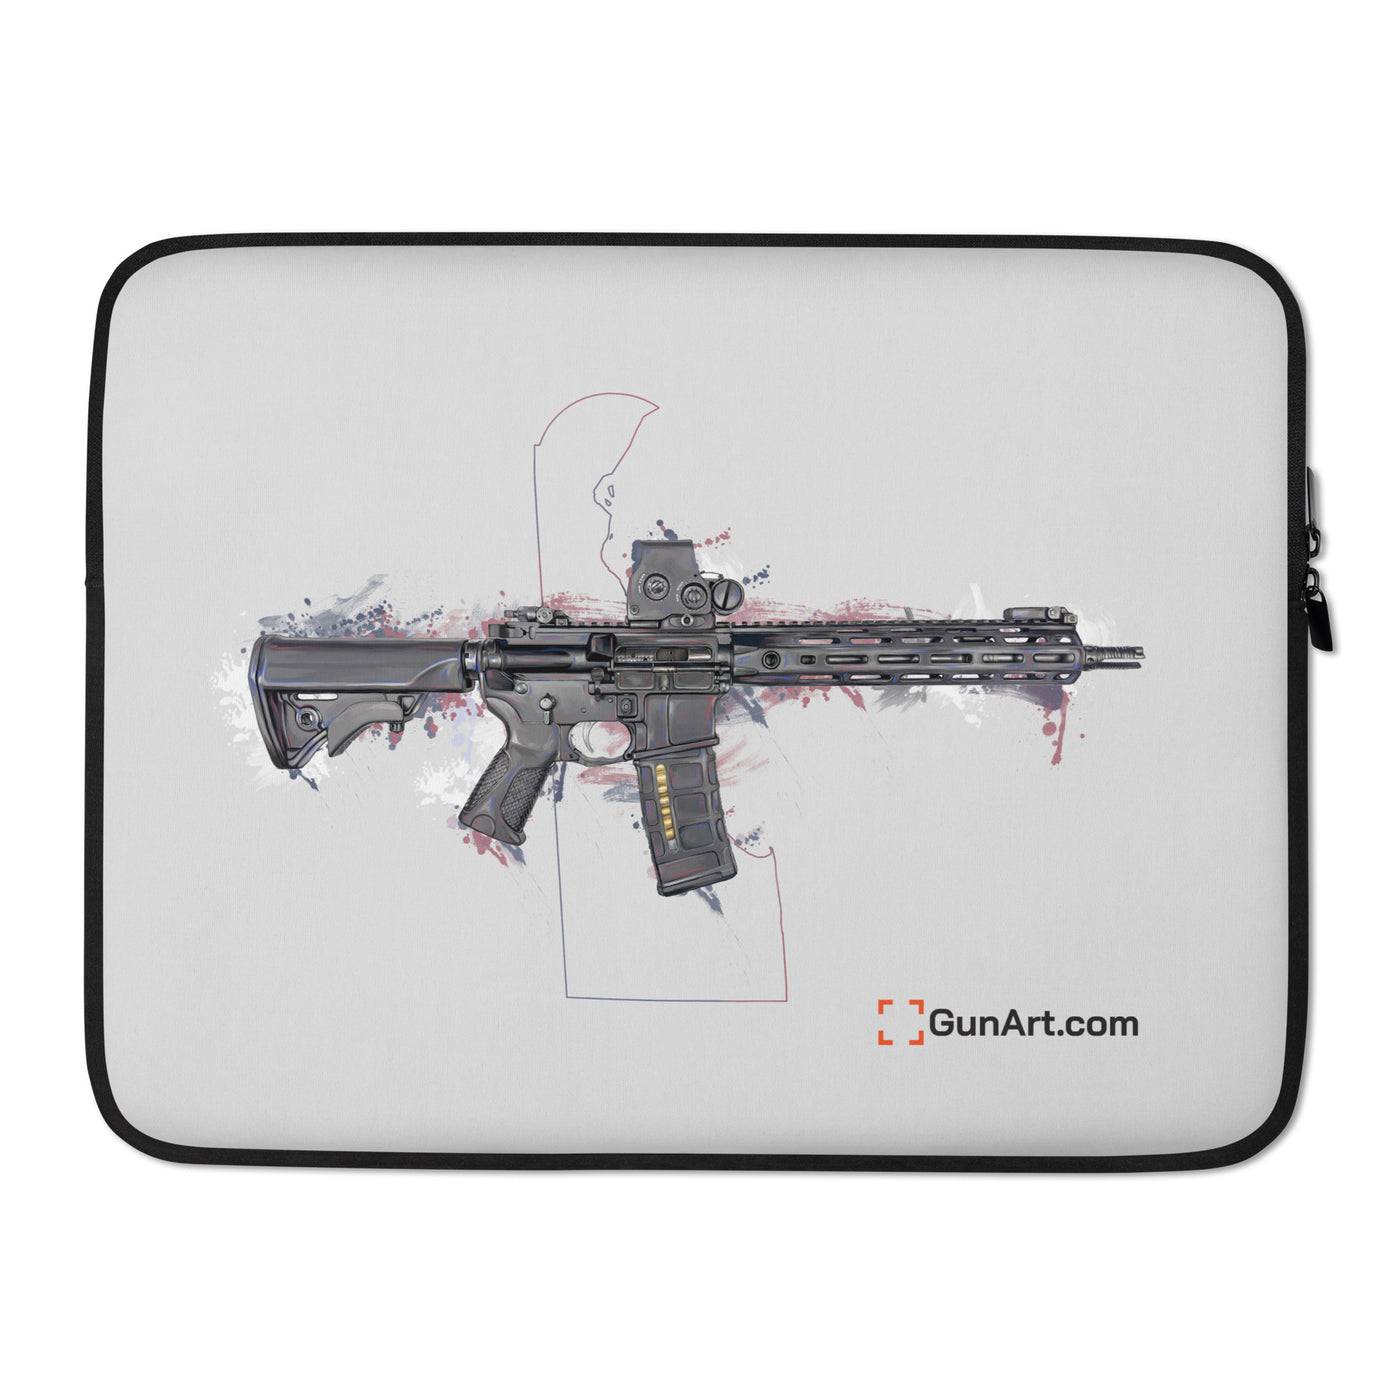 Defending Freedom - Delaware - AR-15 State Laptop Sleeve - Colored State